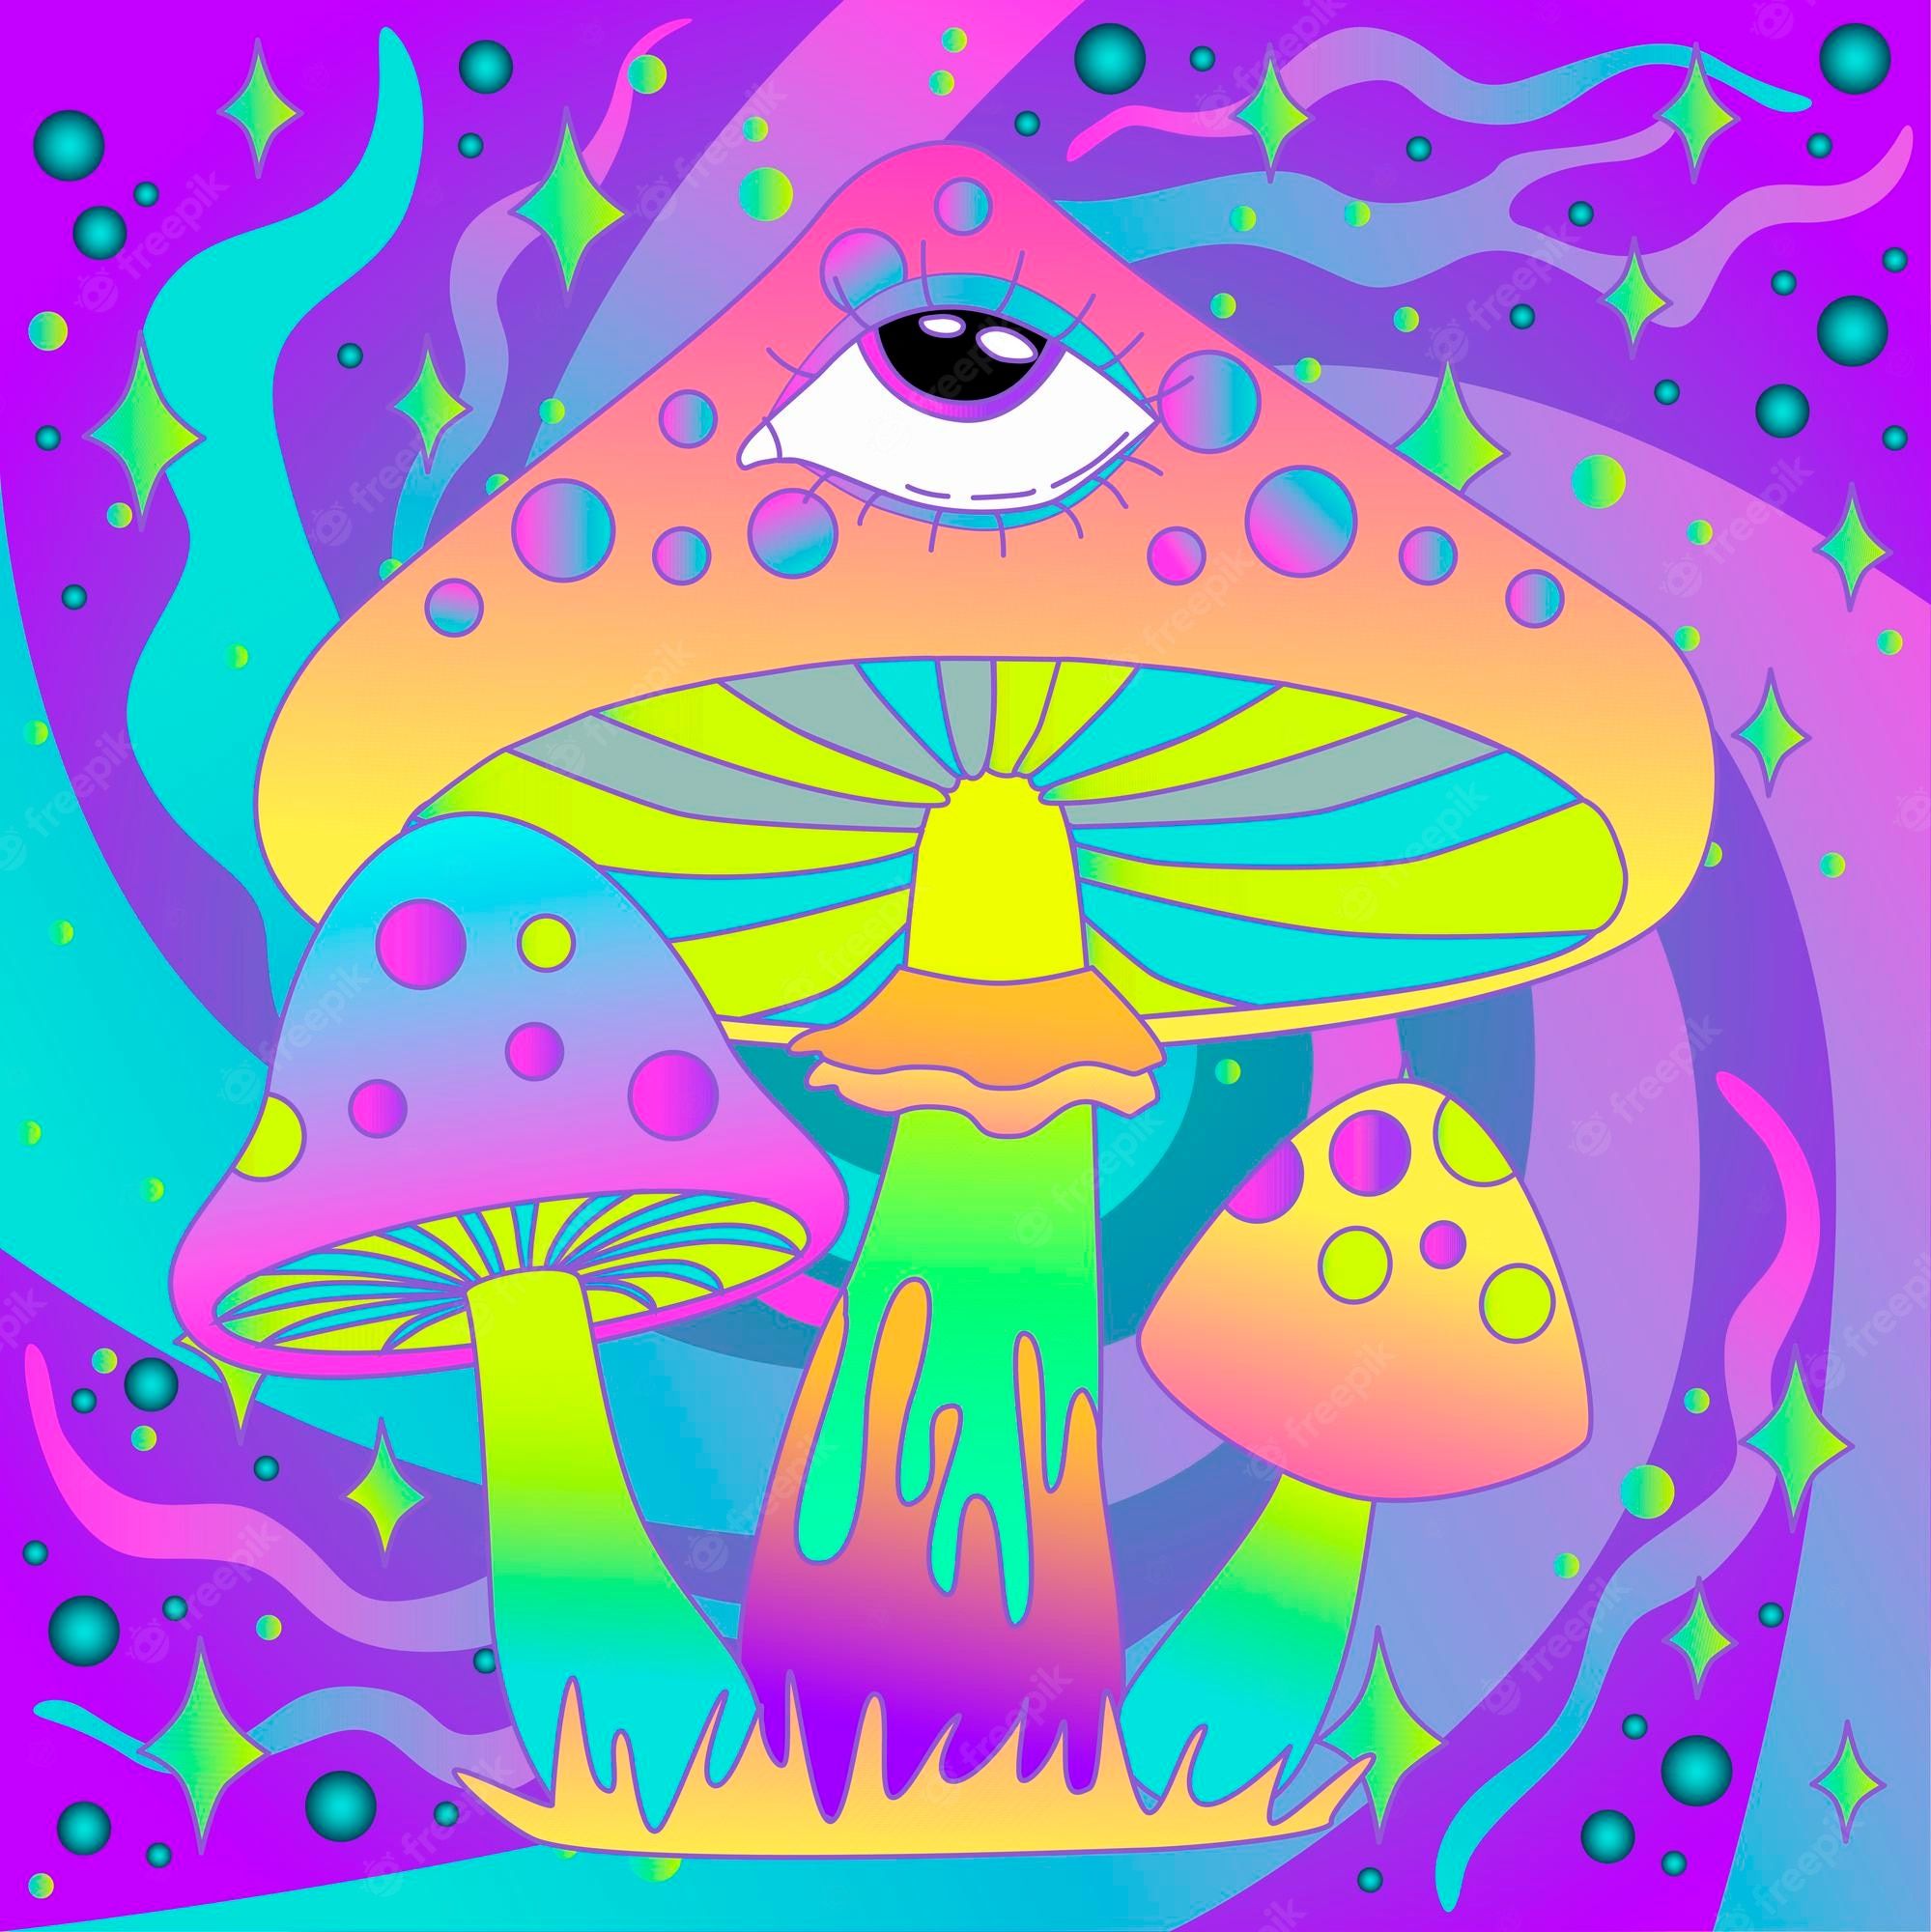 Psychedelic Trippy Background Image